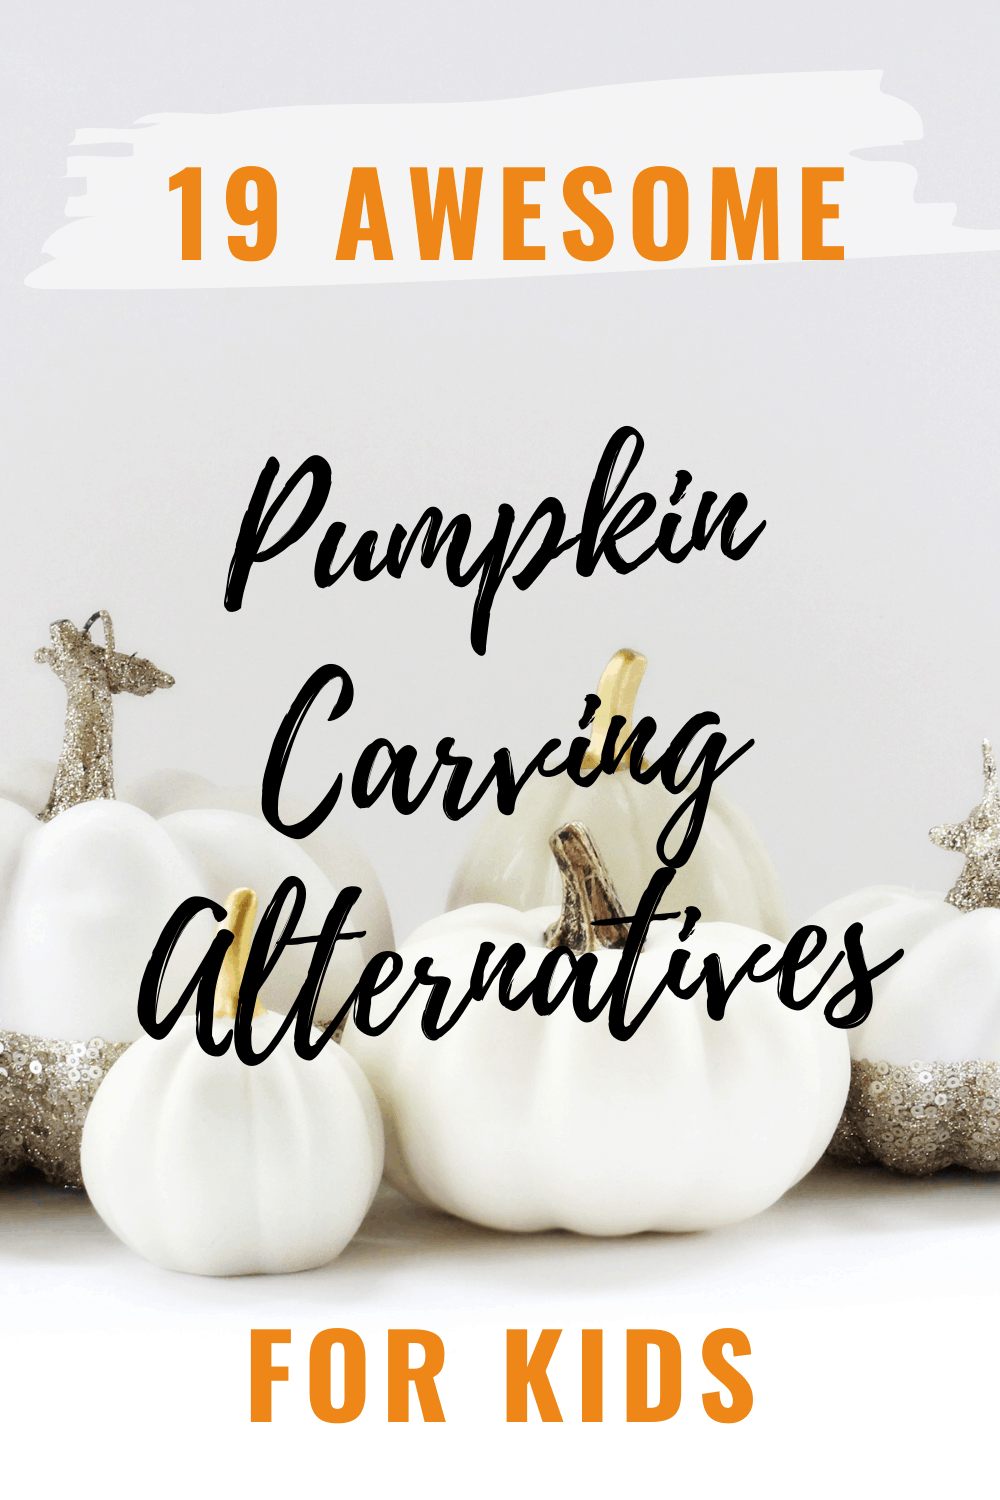 19 Easy Pumpkin Carving Alternatives You Need to Try with Your Kids